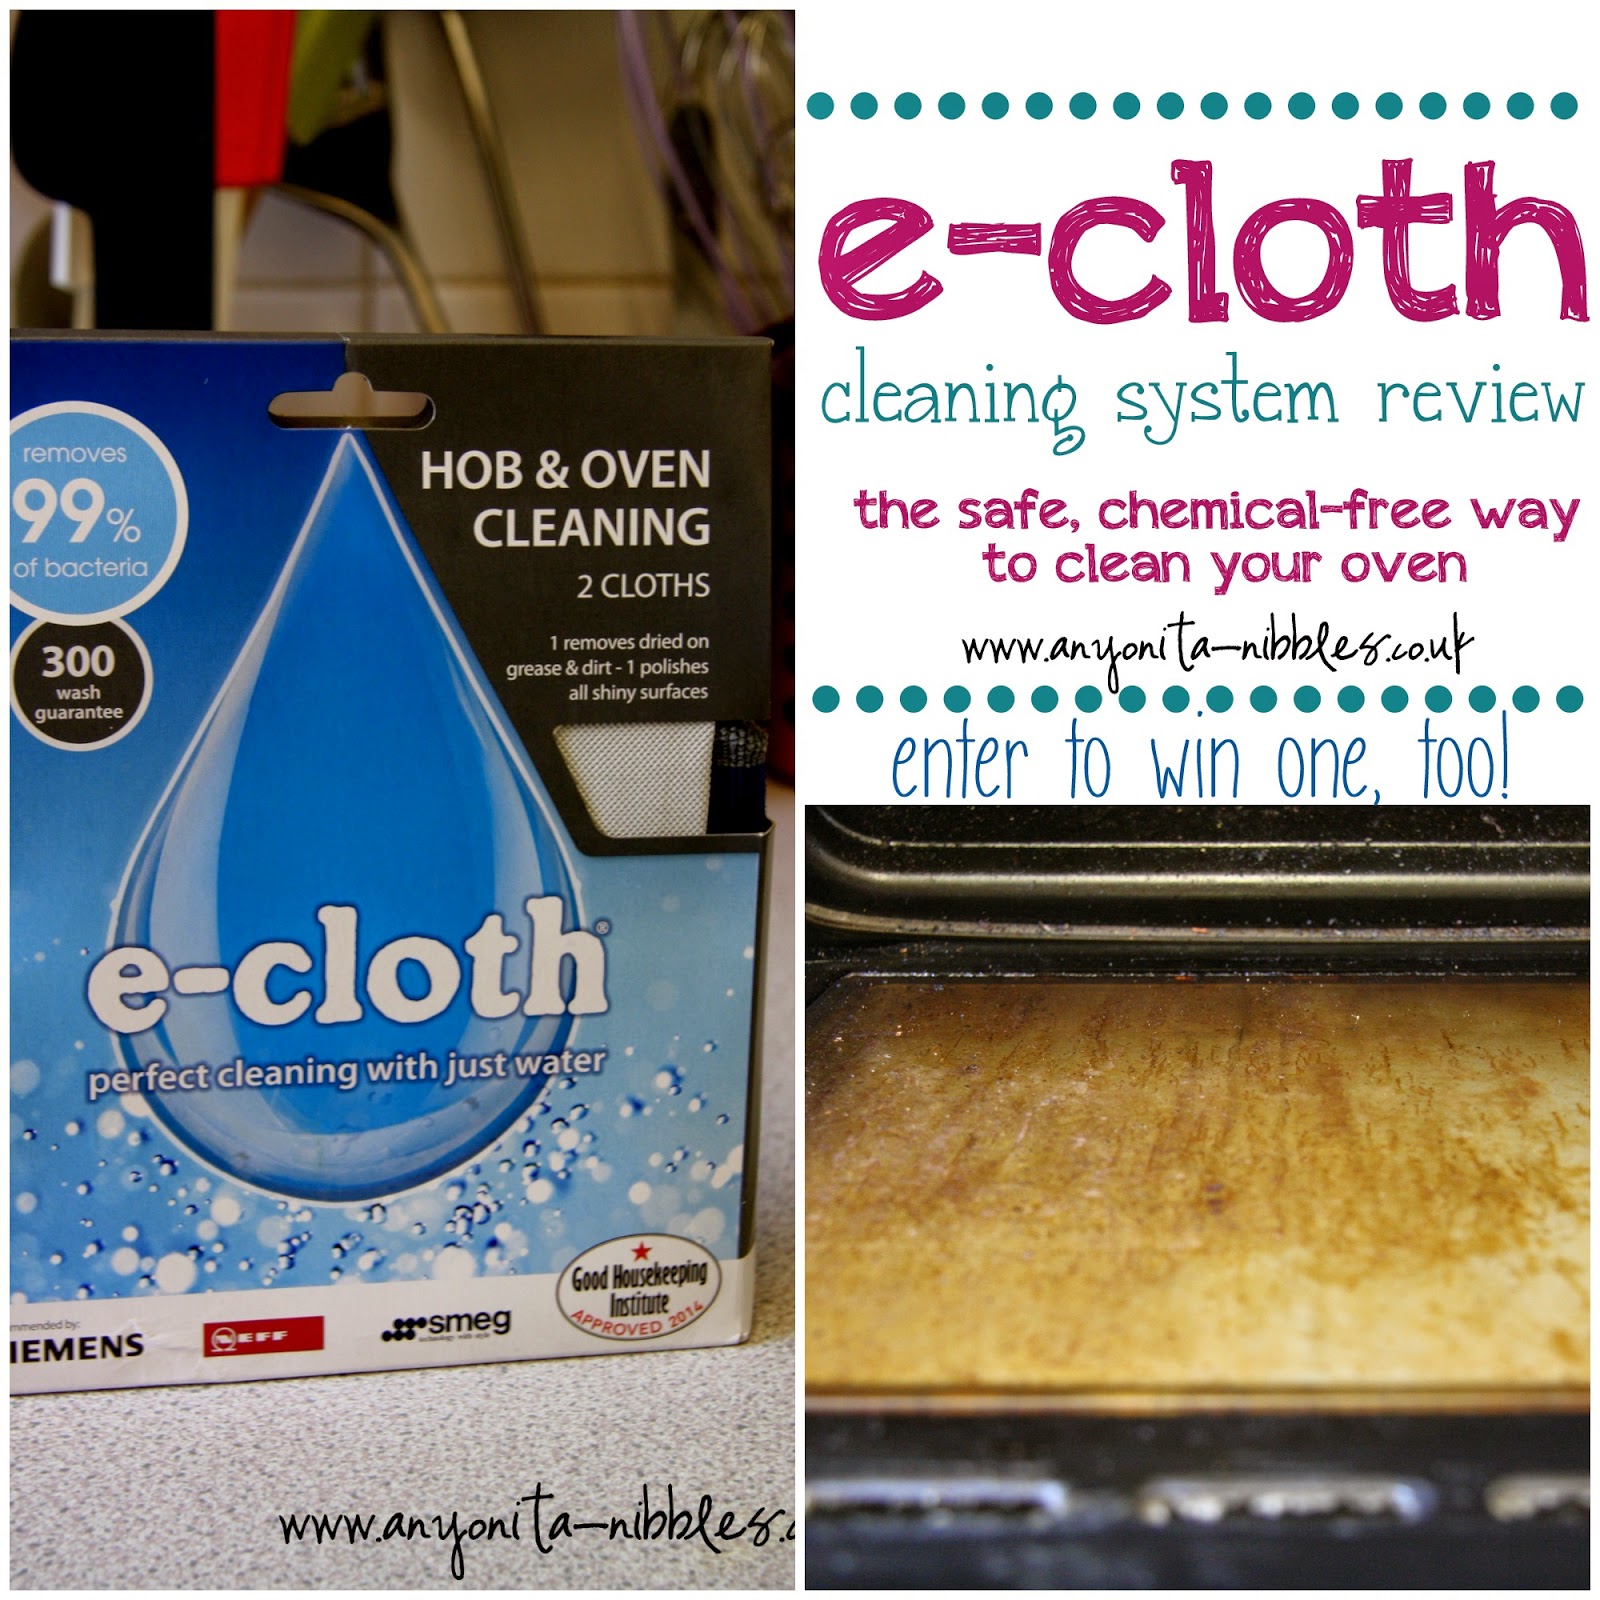 e-cloth hob & oven review & giveaway from www.anyonita-nibbles.co.uk